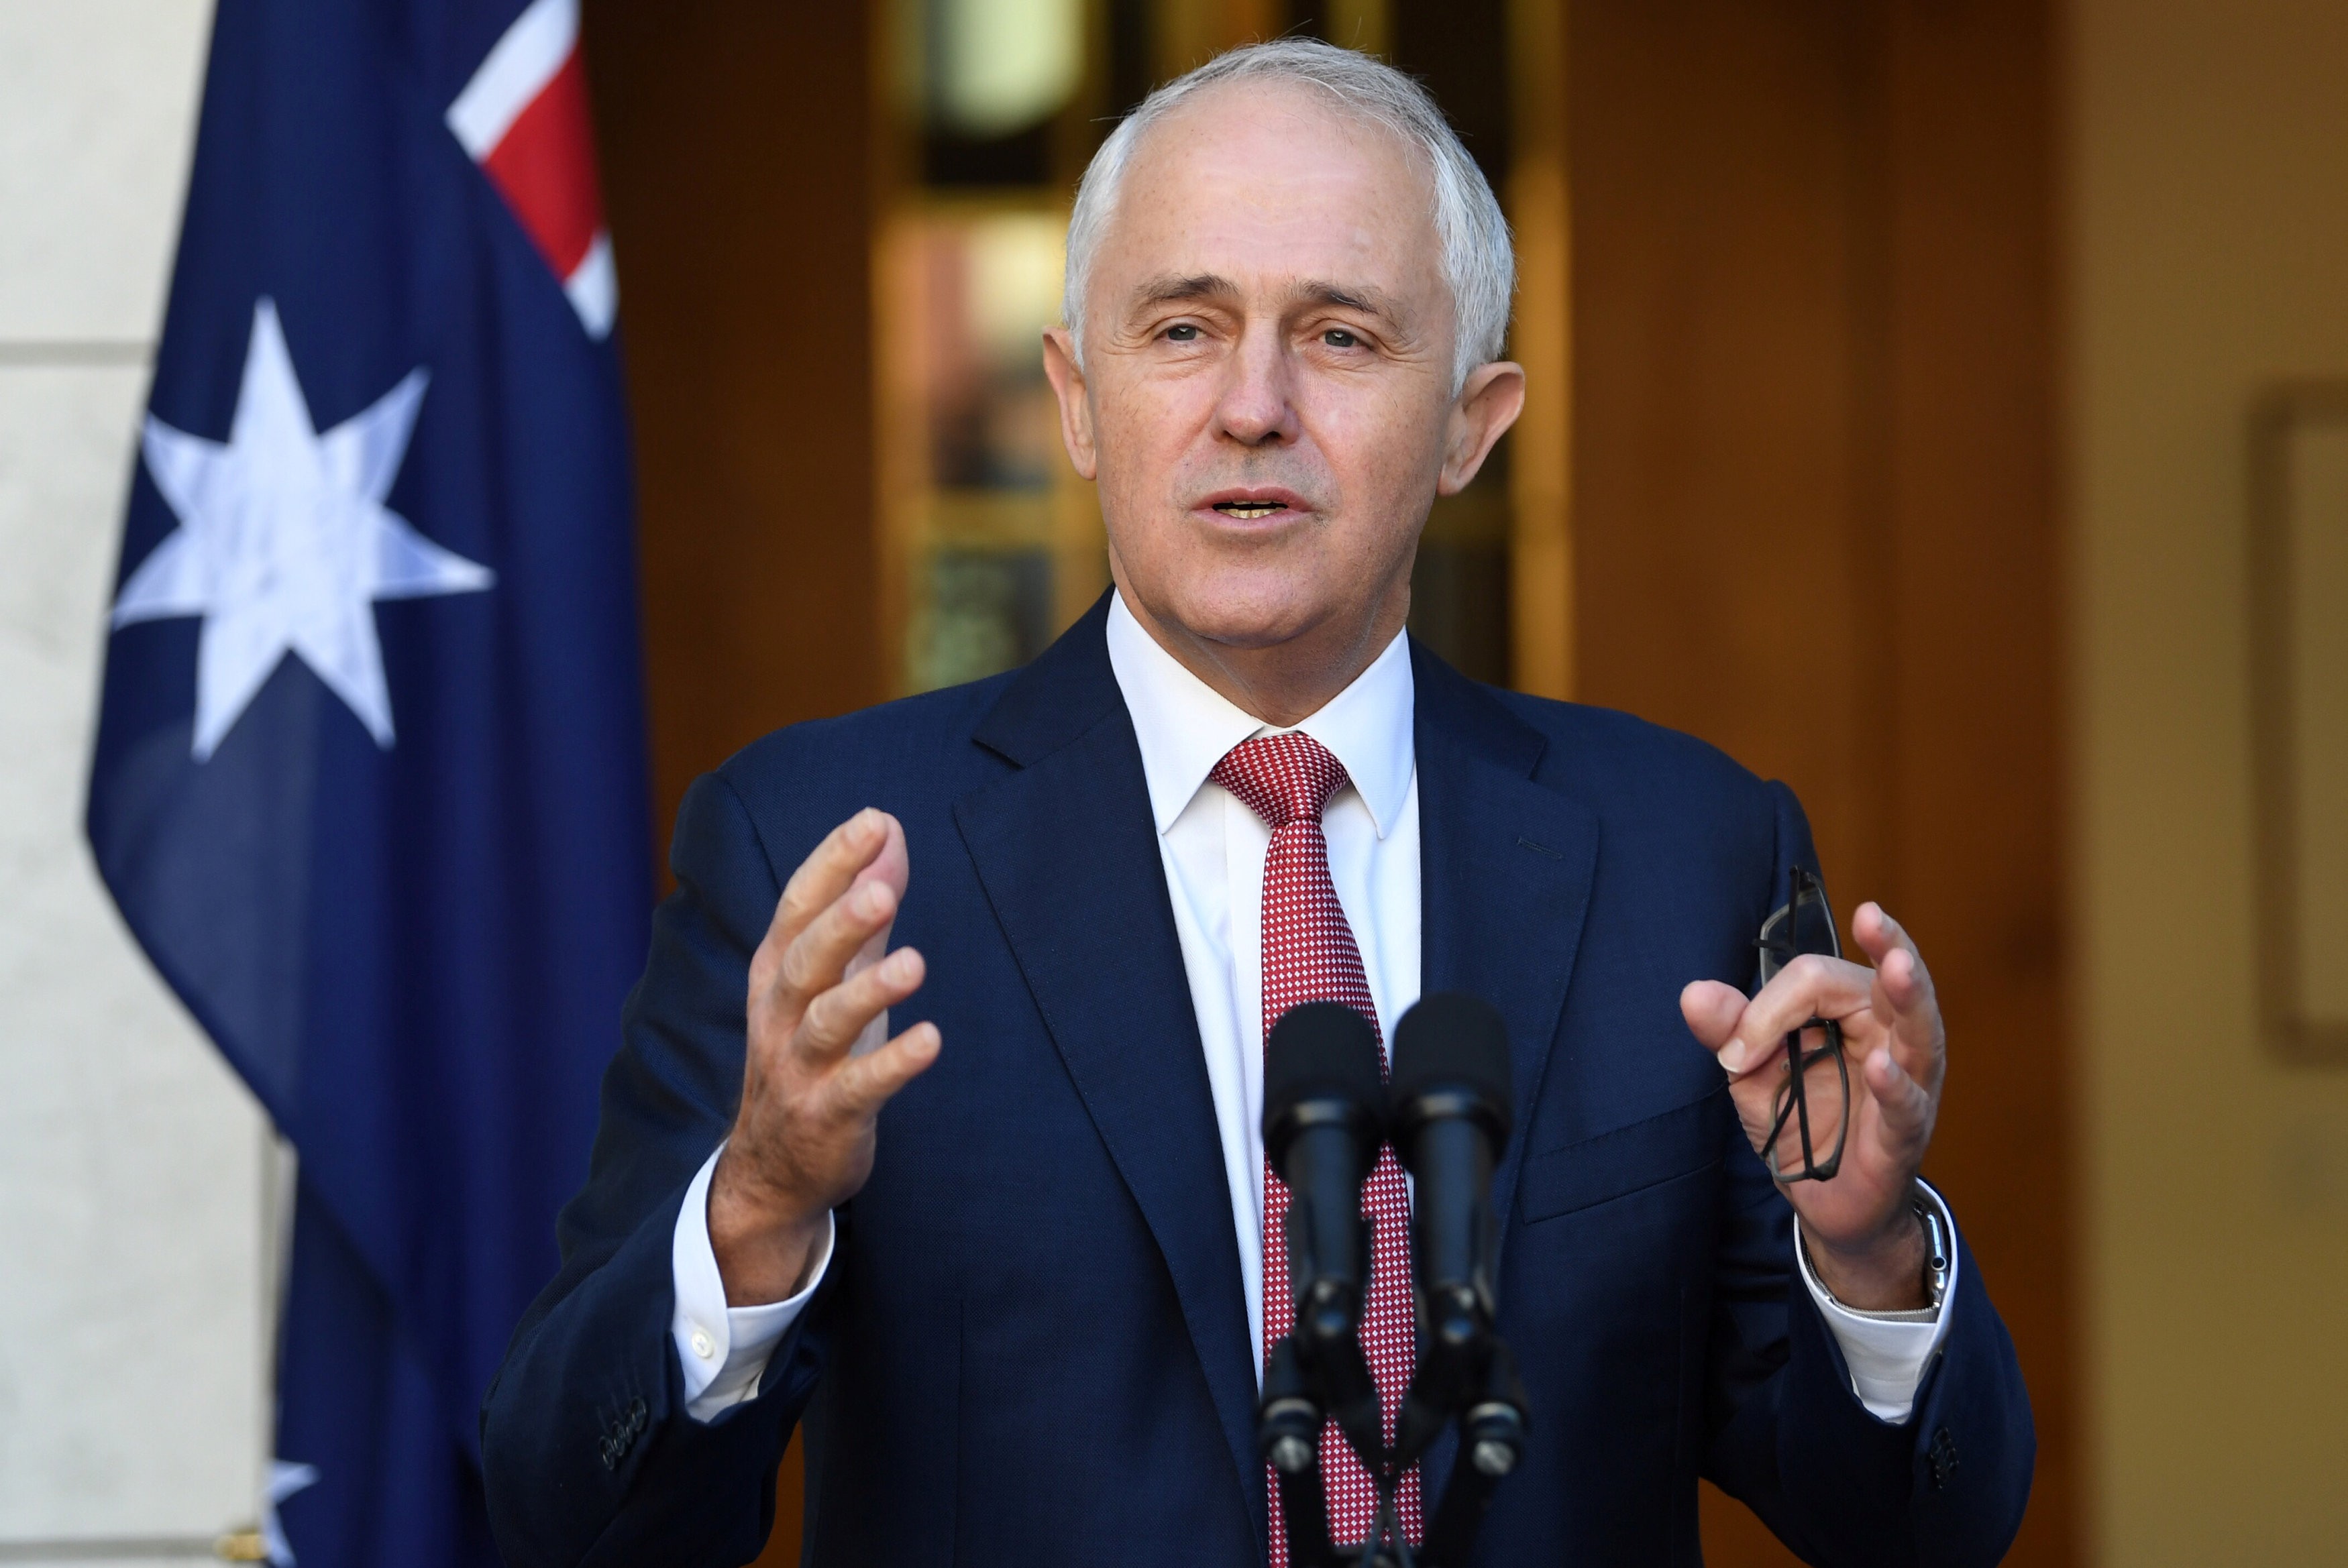 Prime Minister Malcolm Turnbull said his government would “no longer allow 457 visas to be passports to jobs that could and should go to Australians”. Photo: Reuters